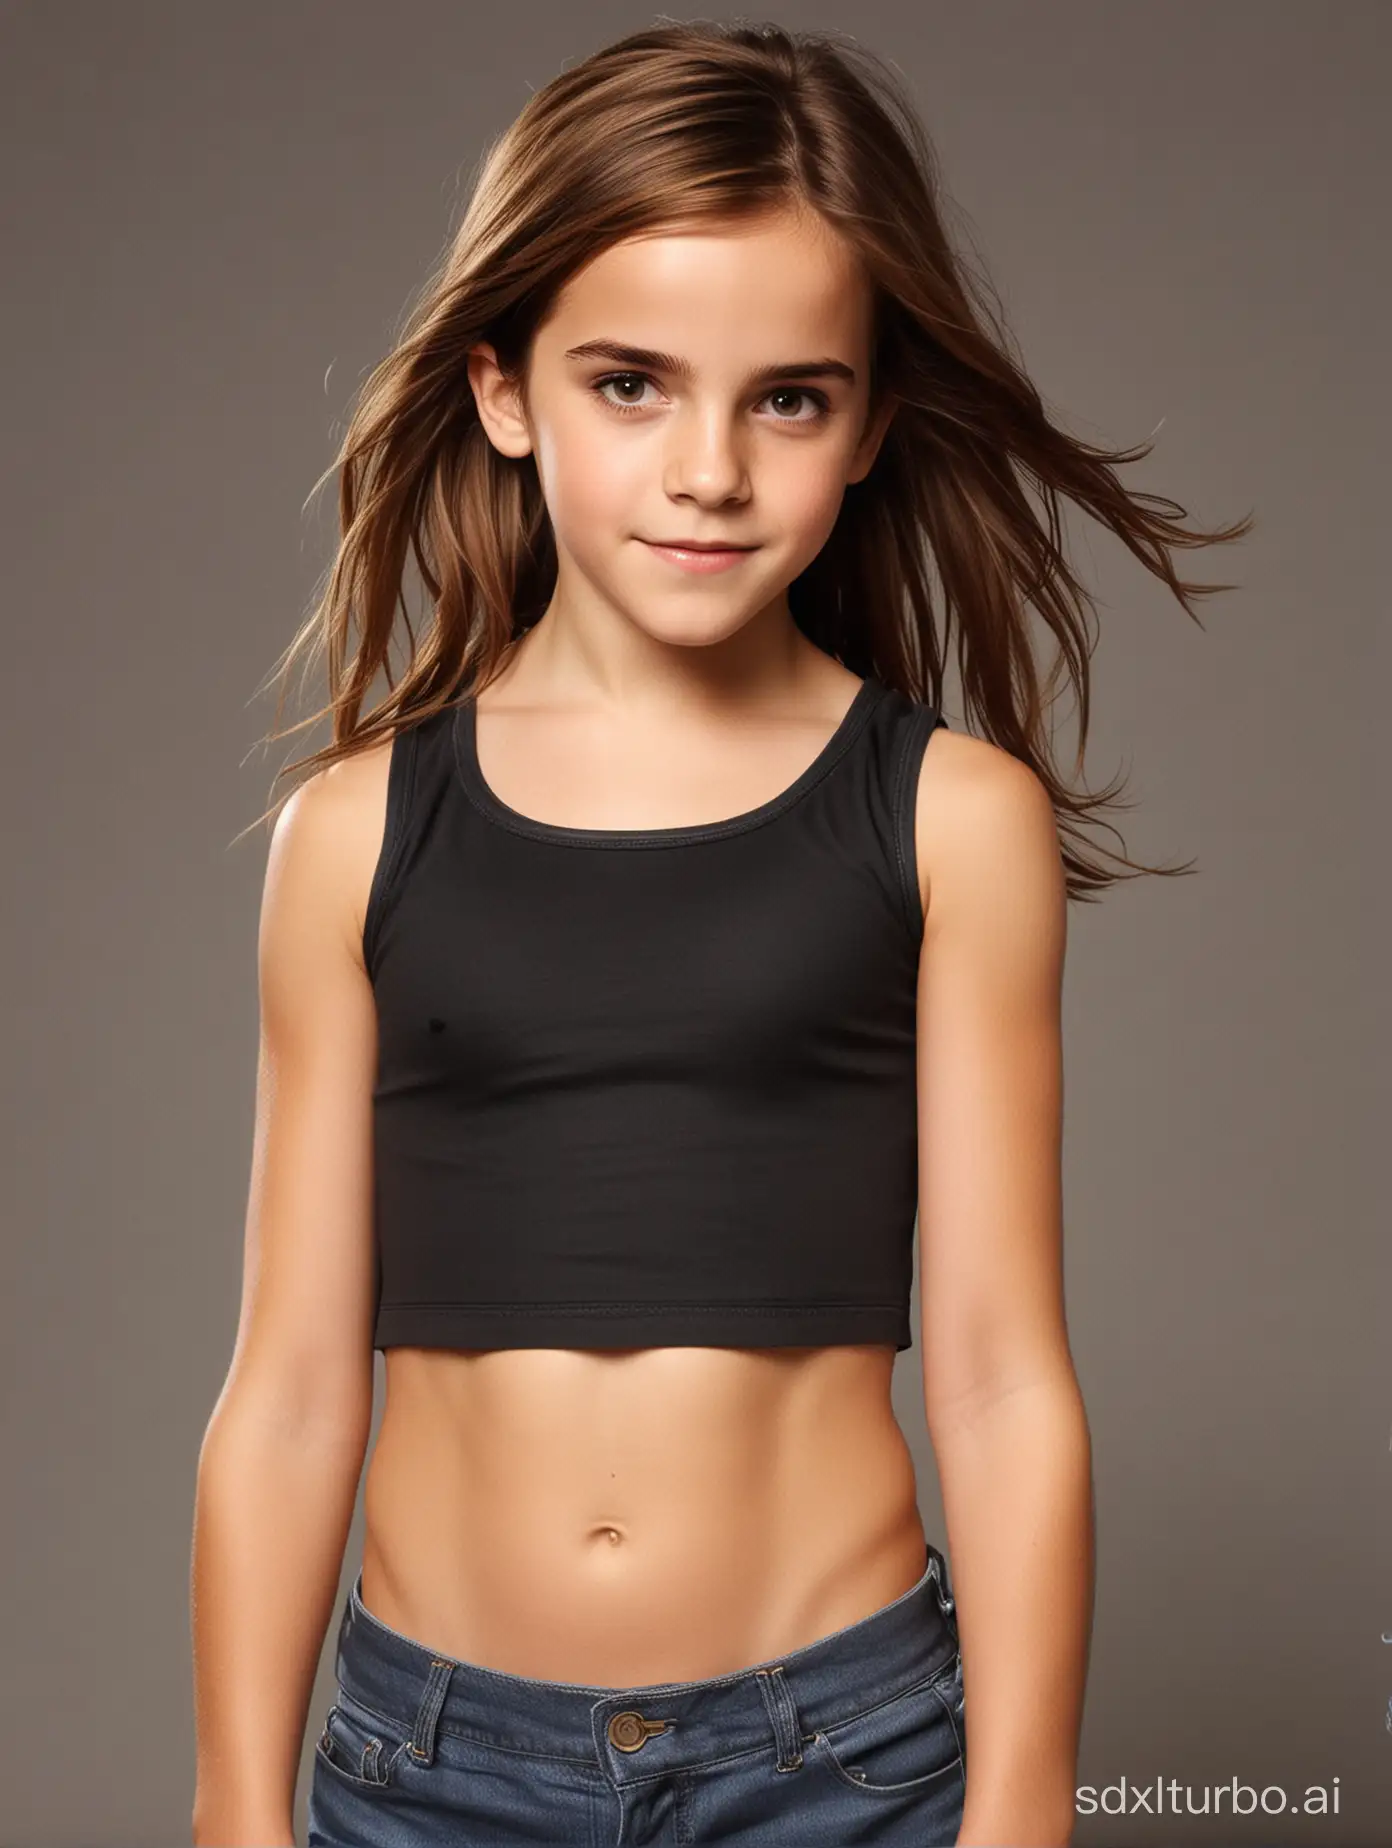 Emma Watson at 6 years old, long hair, very muscular abs